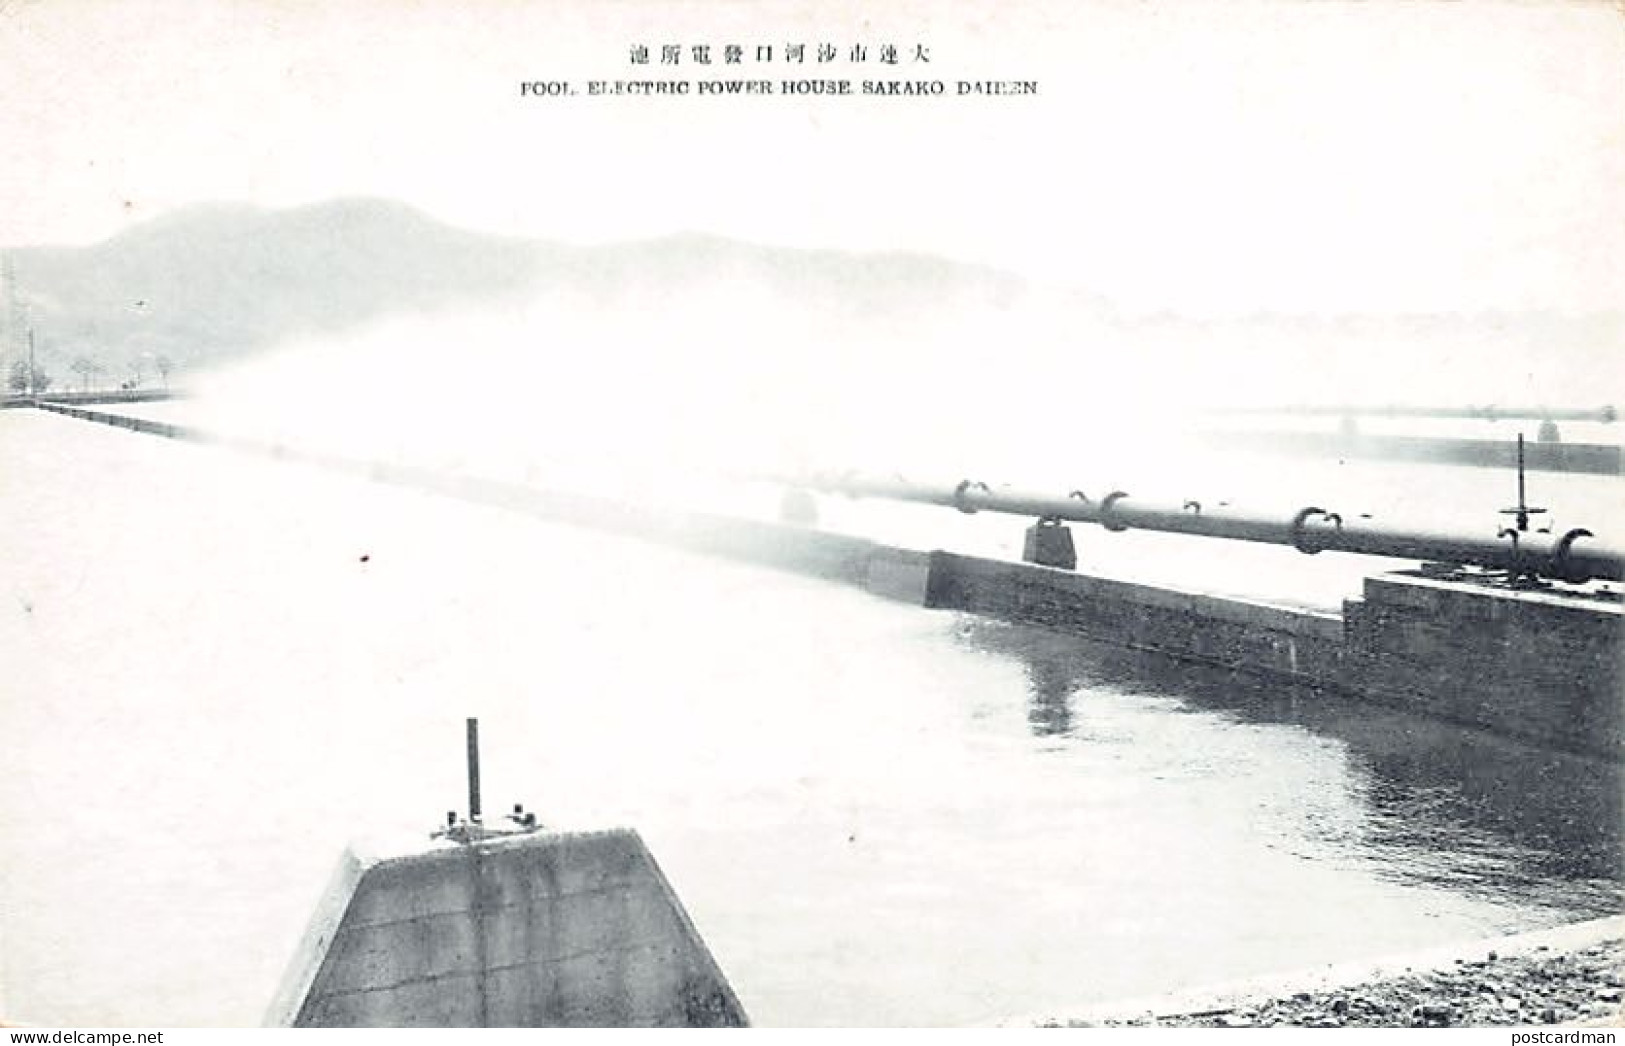 China - DALIAN Darien - Pool Of The Electric Power House - Publ. Unknown  - Chine